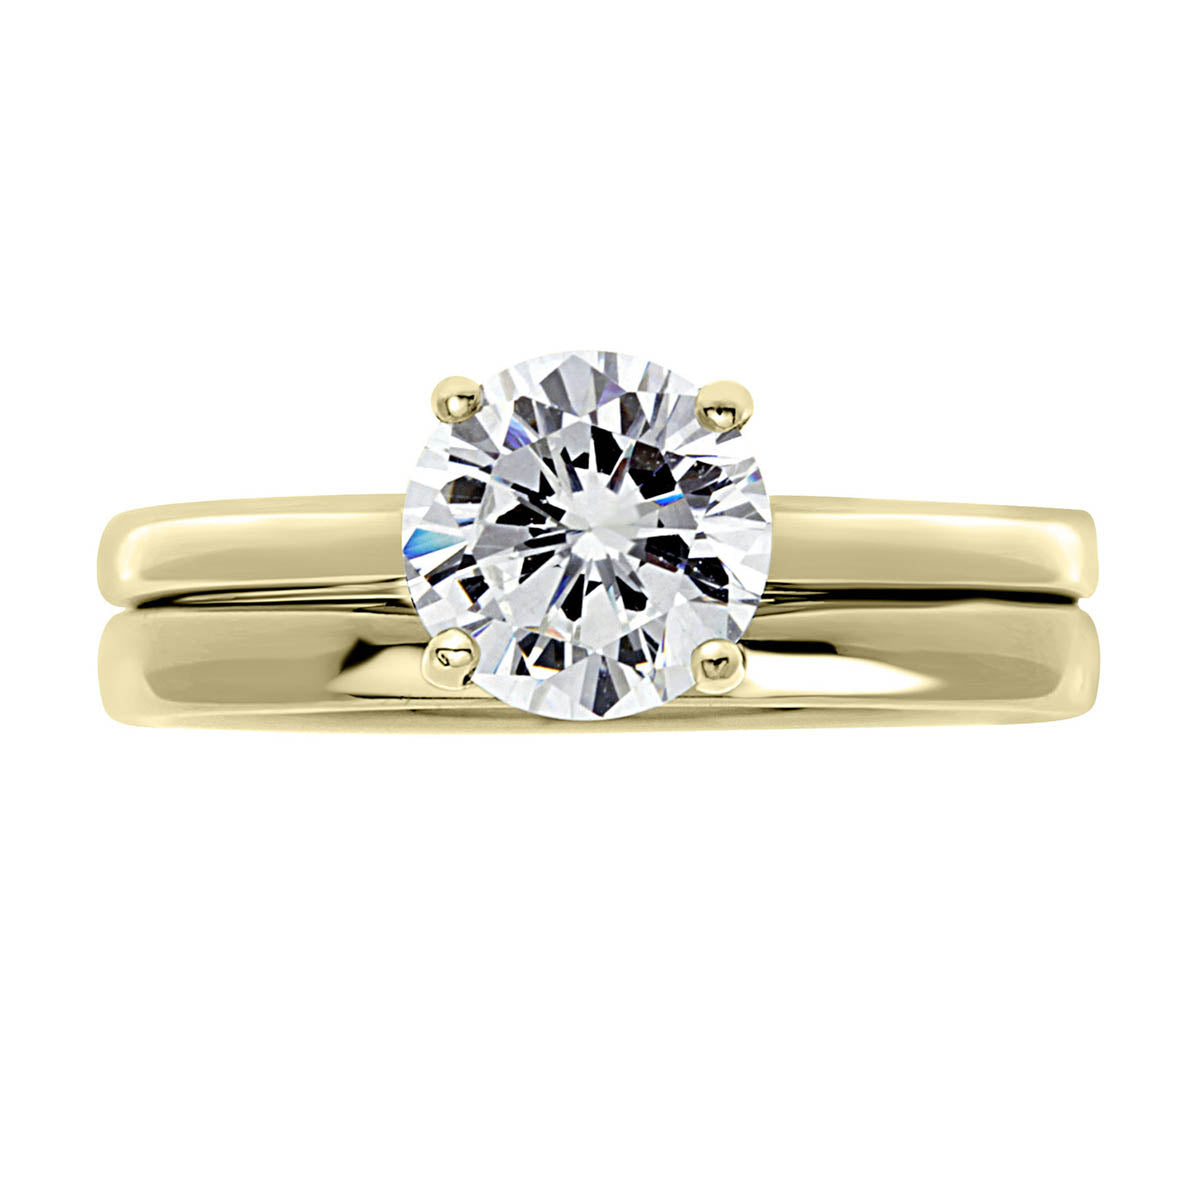 Solitaire Engagement Ring in yellow gold pictured with a plain wedding ring